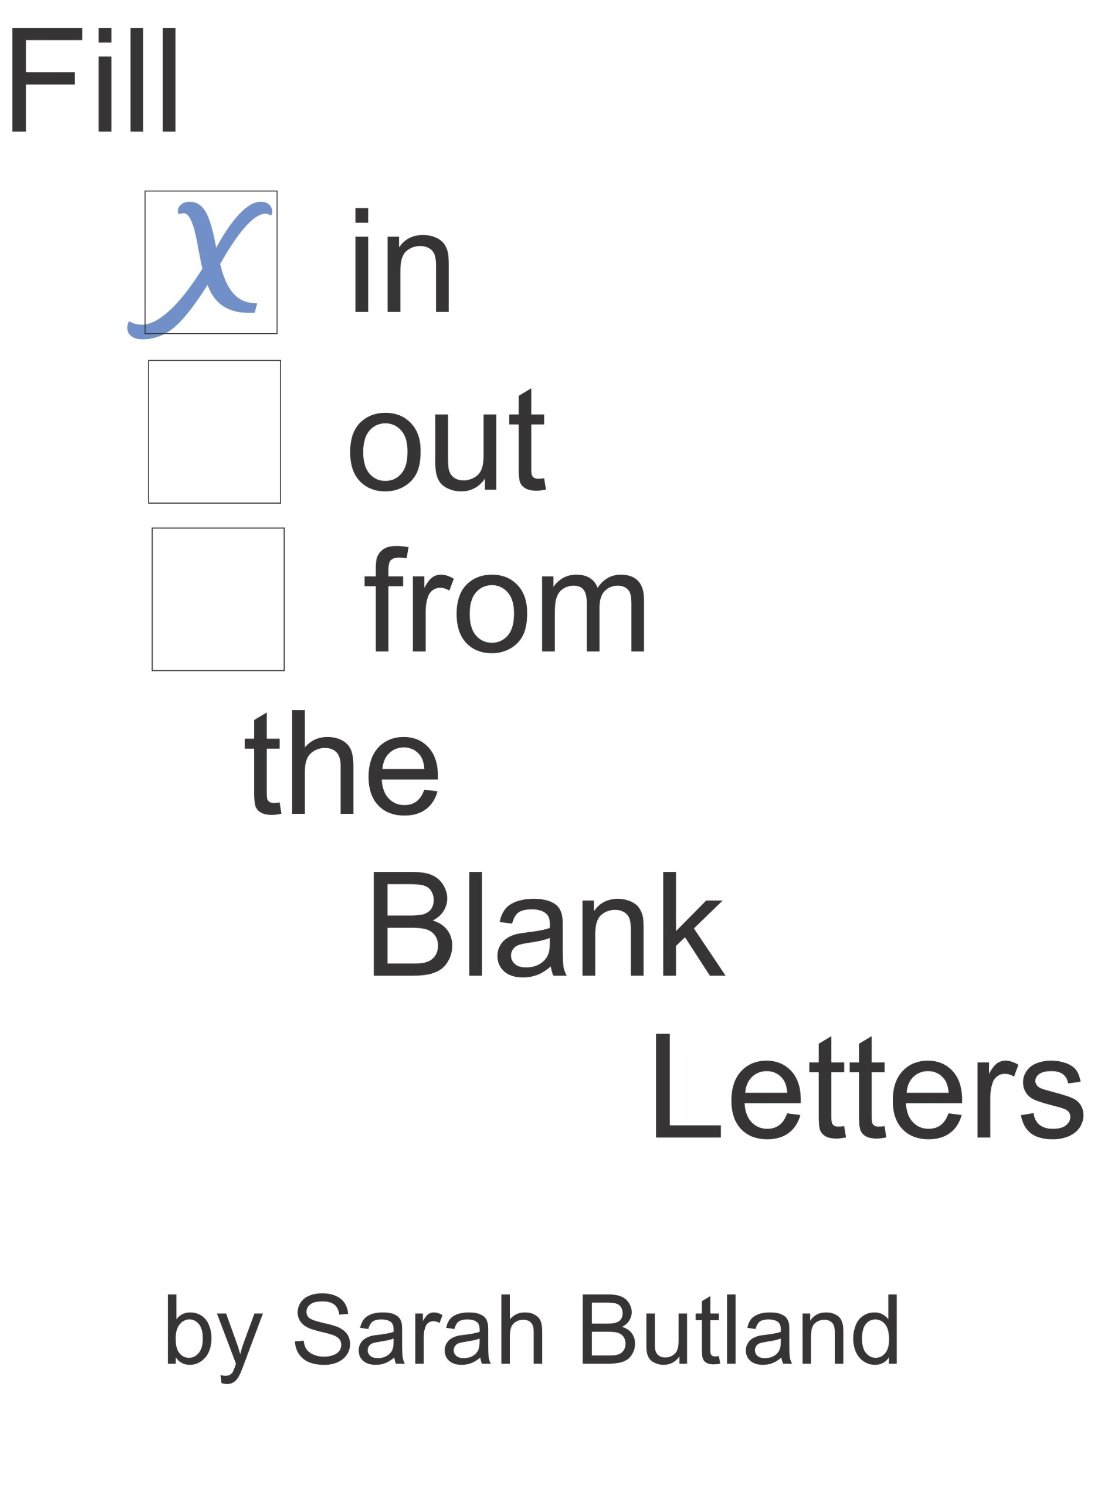 blank letter copy and paste